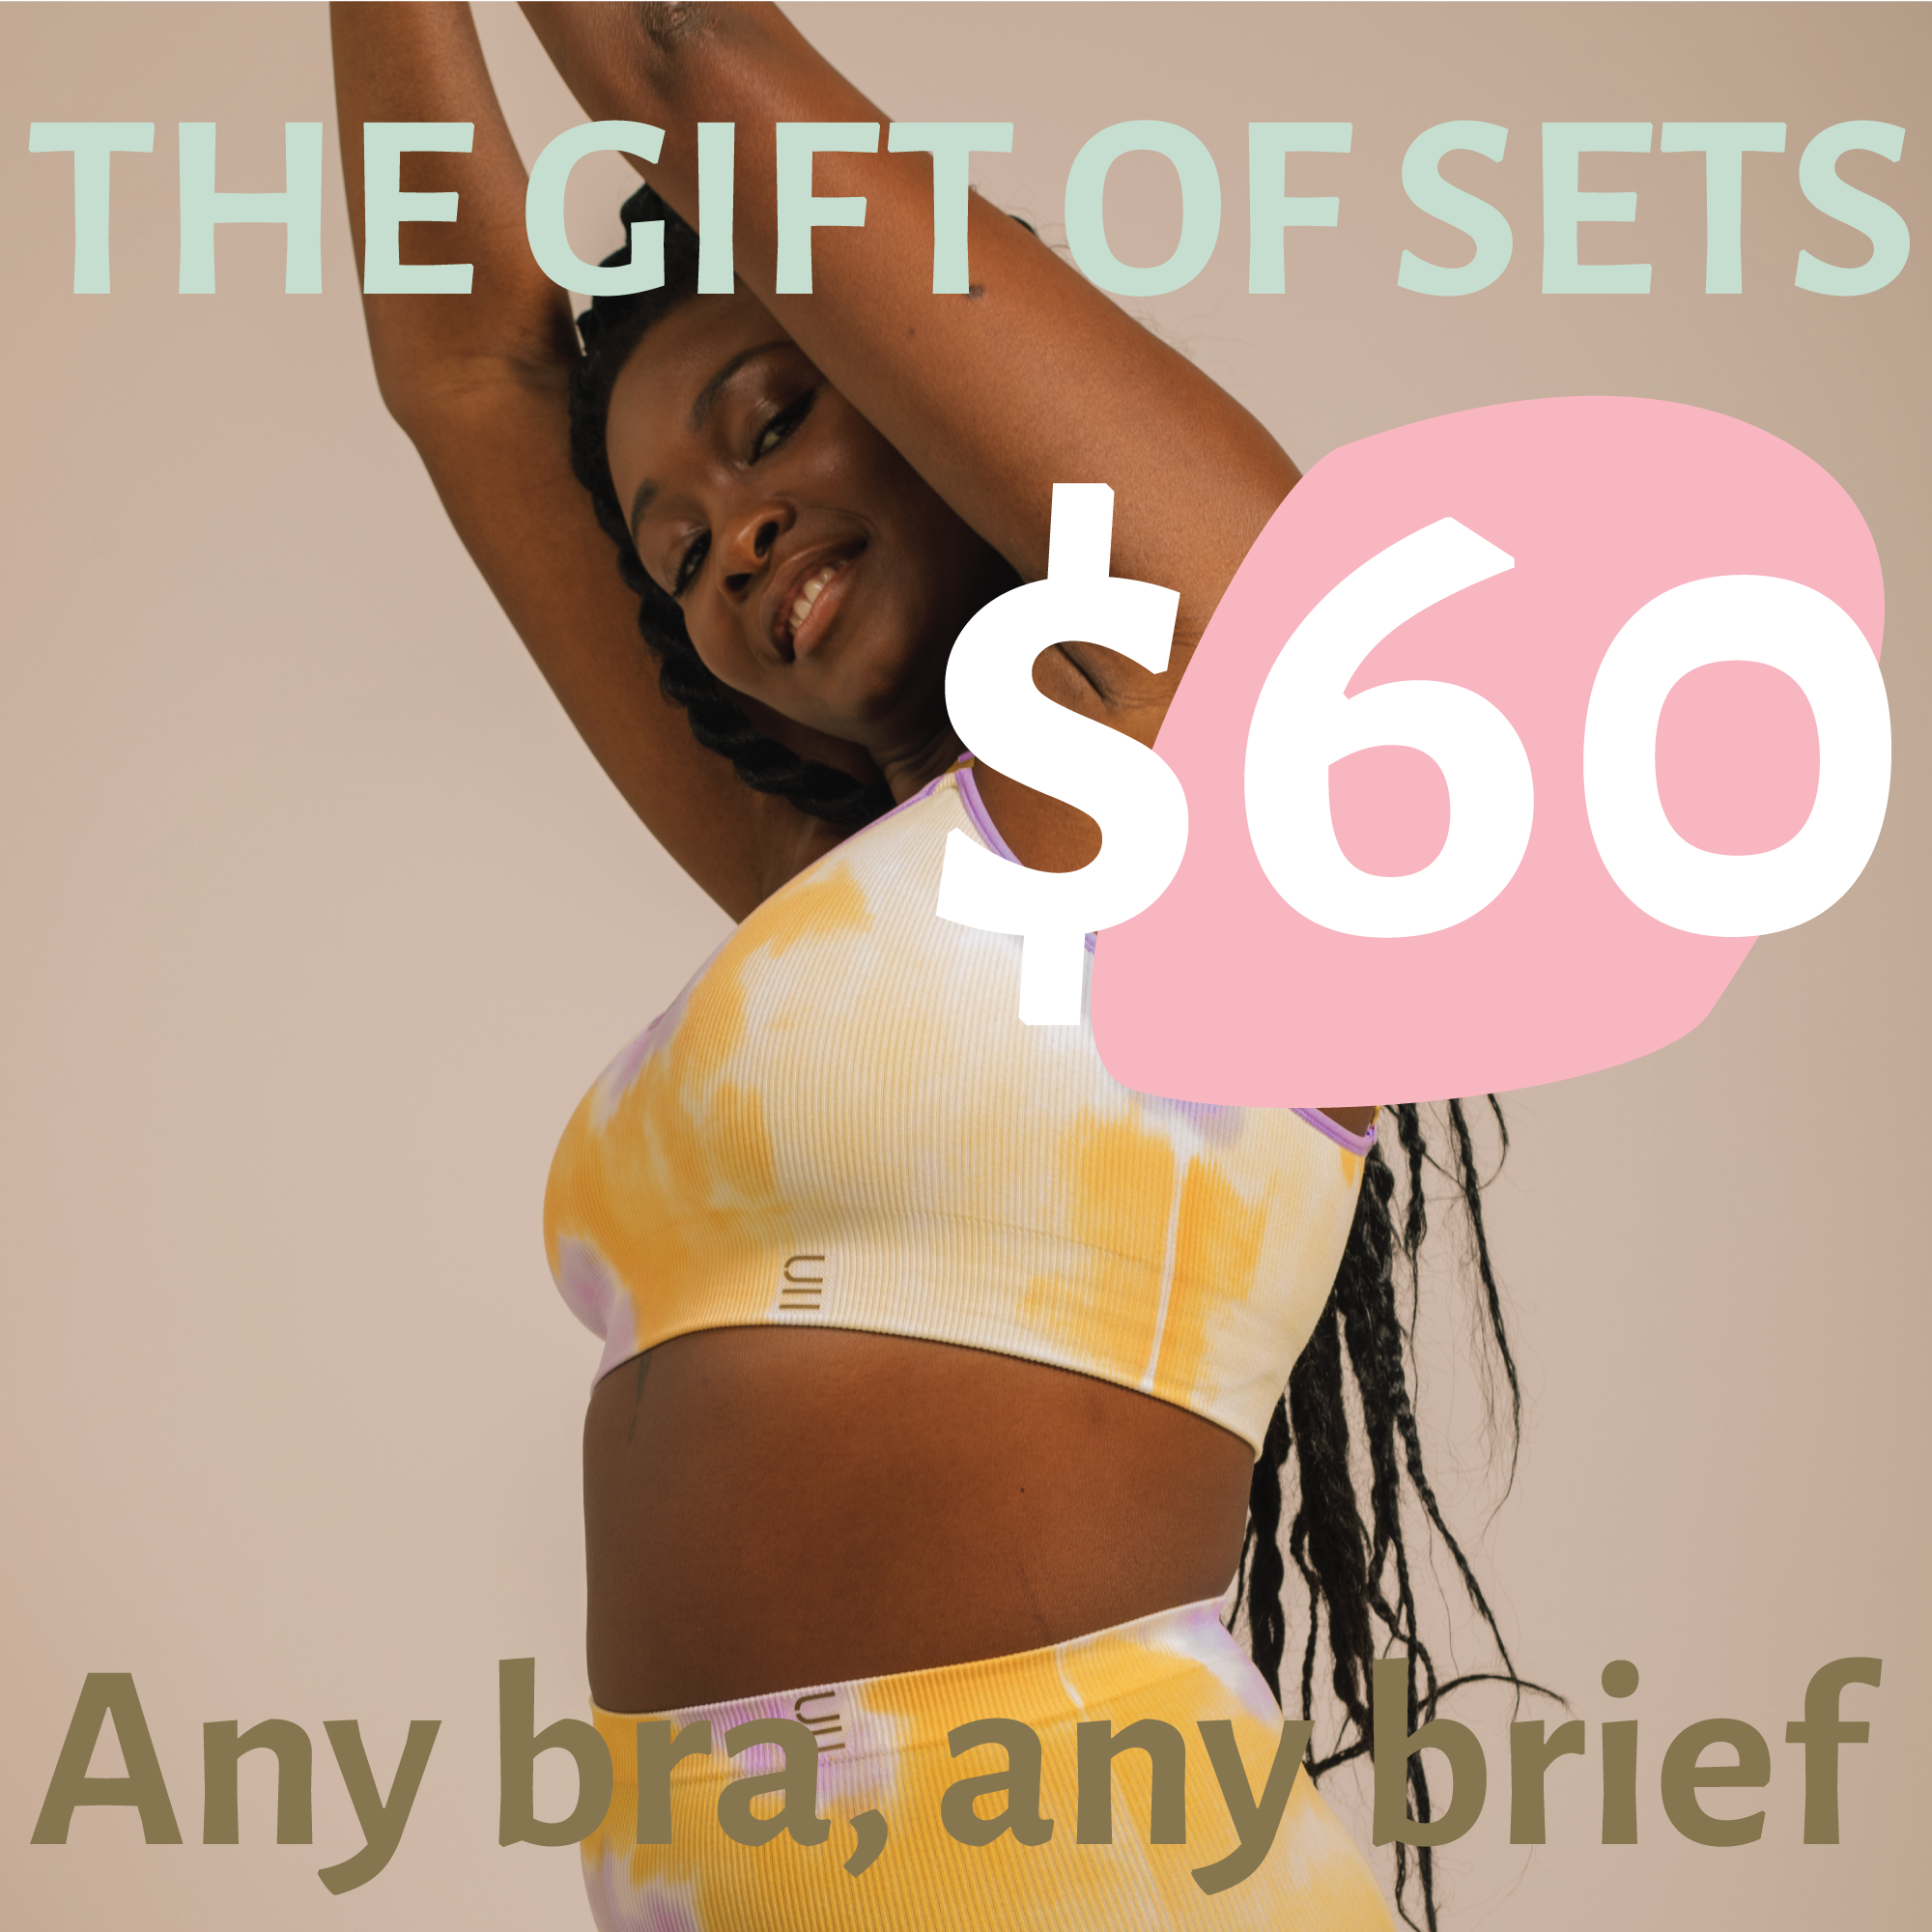 $60 GIFTS FOR HER